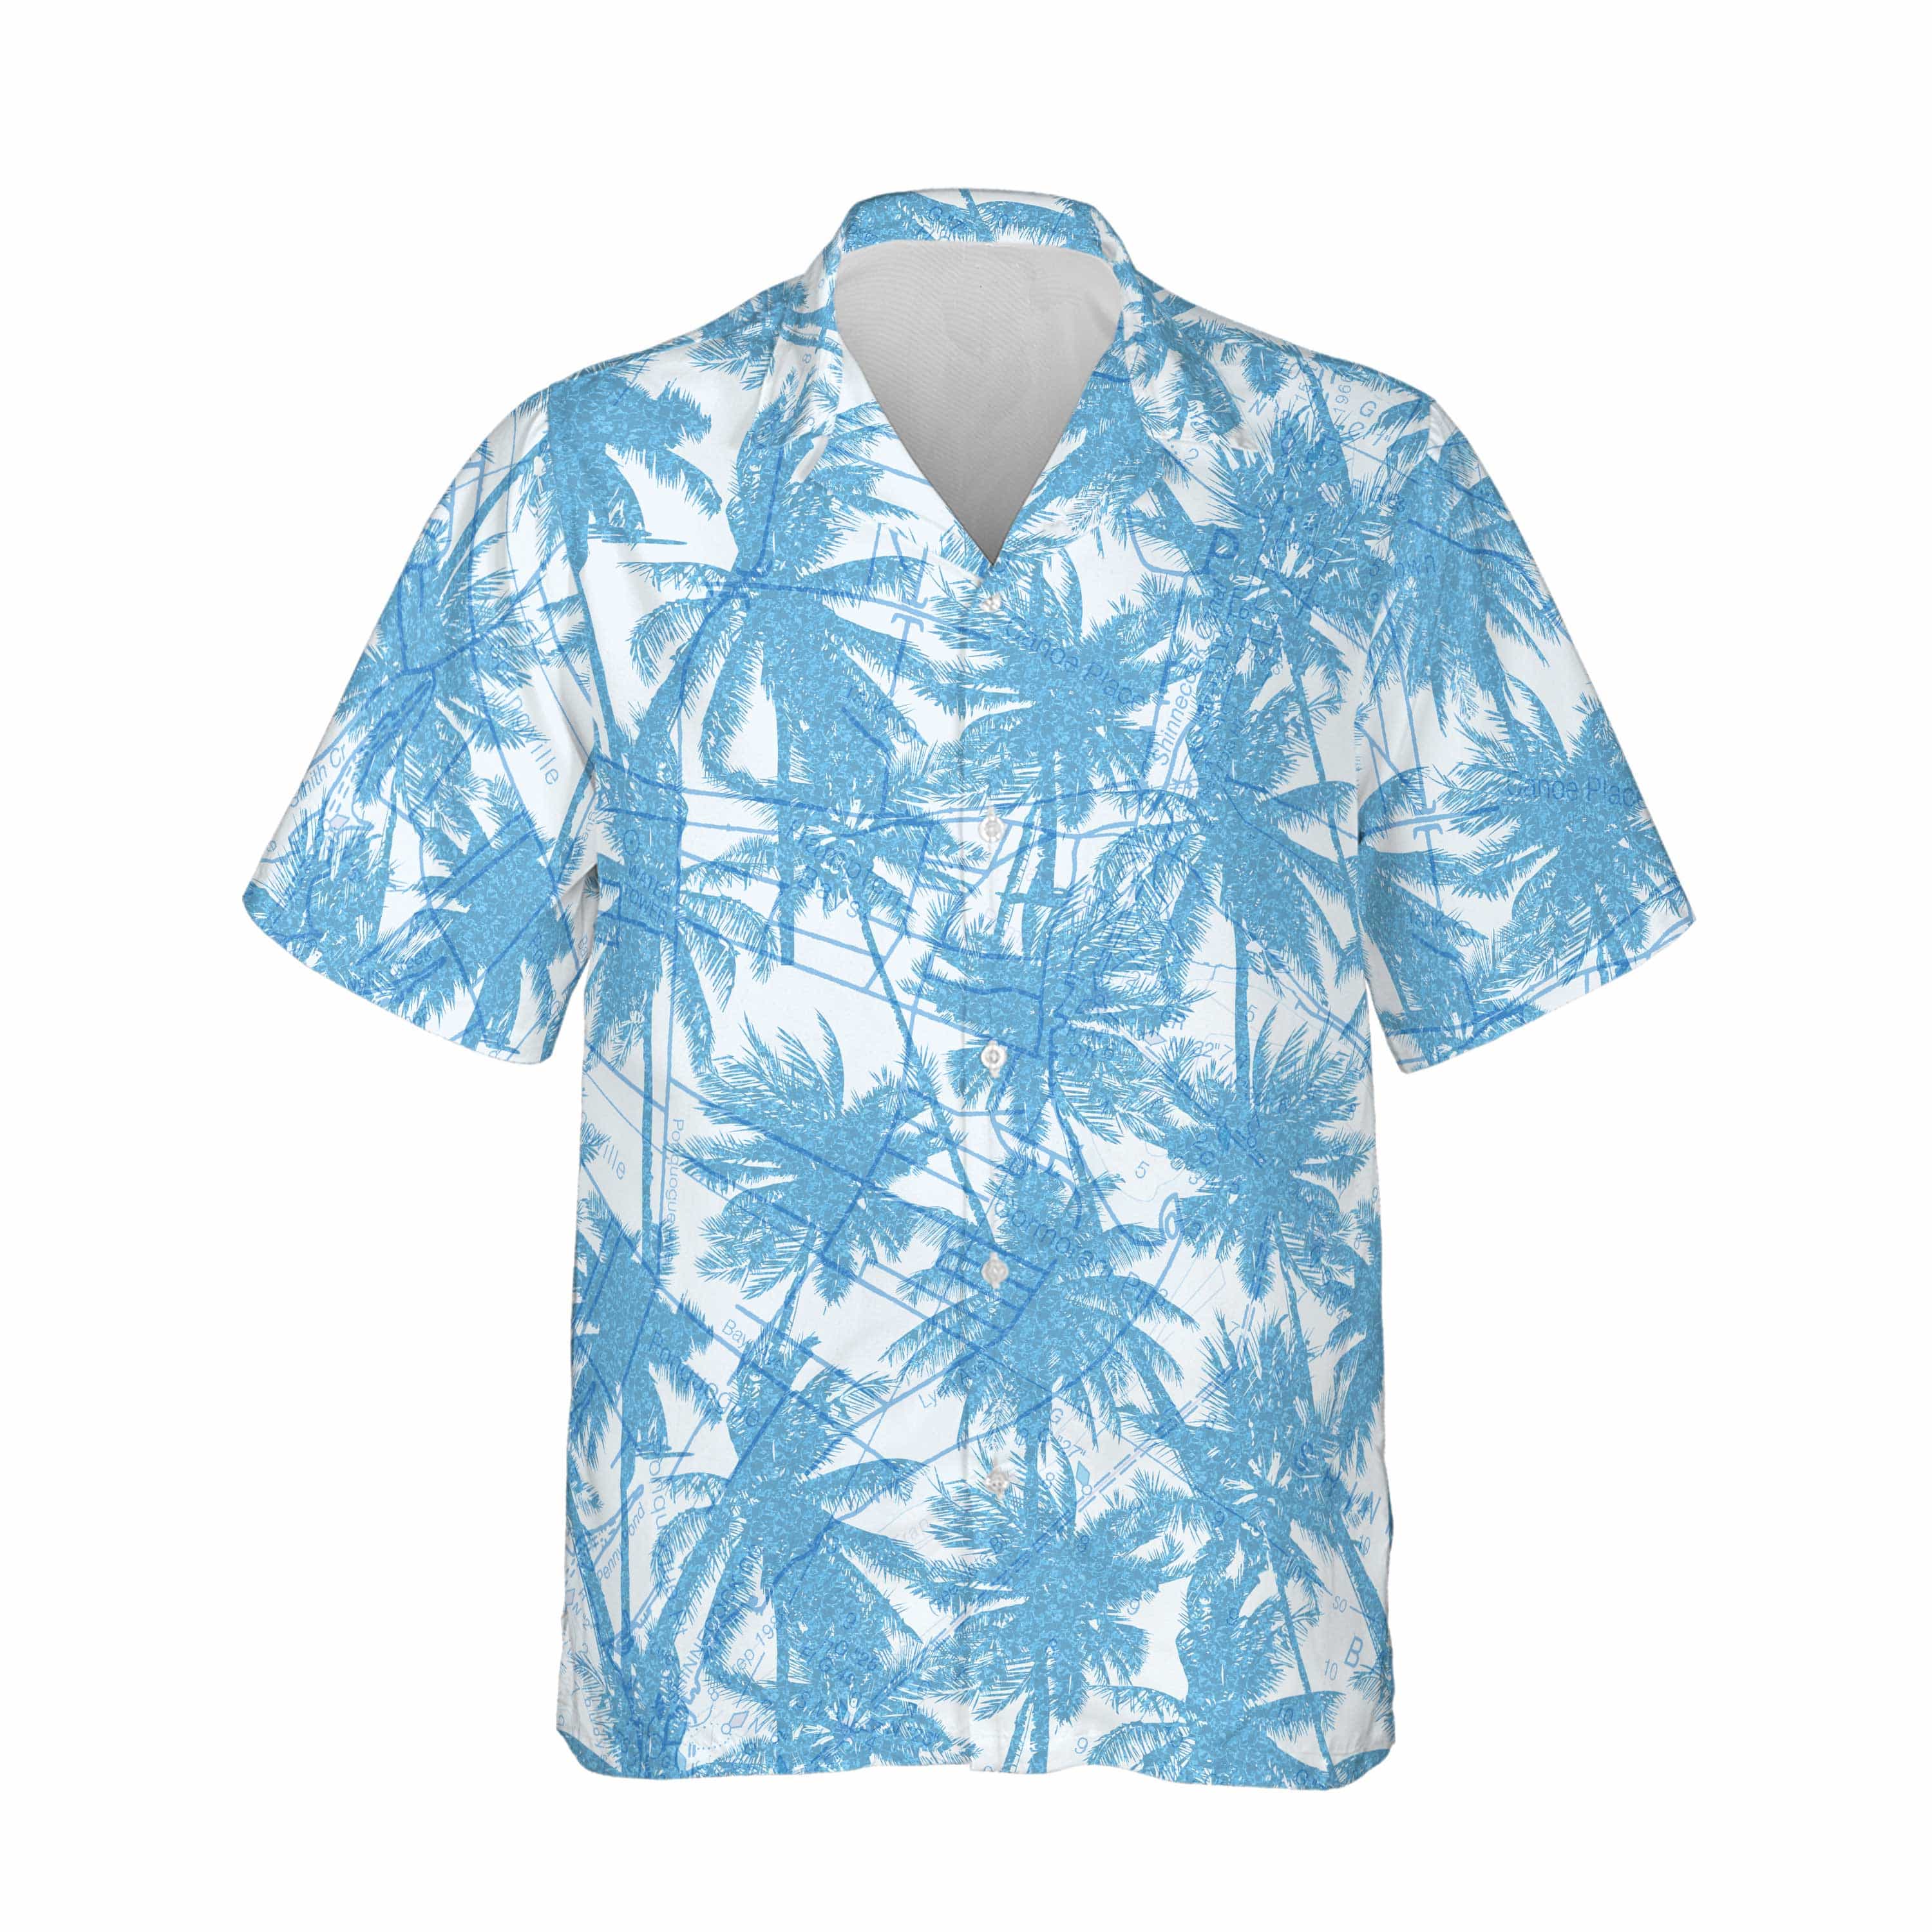 The Cool Blue Palms of Shinnecock Canal Shirt